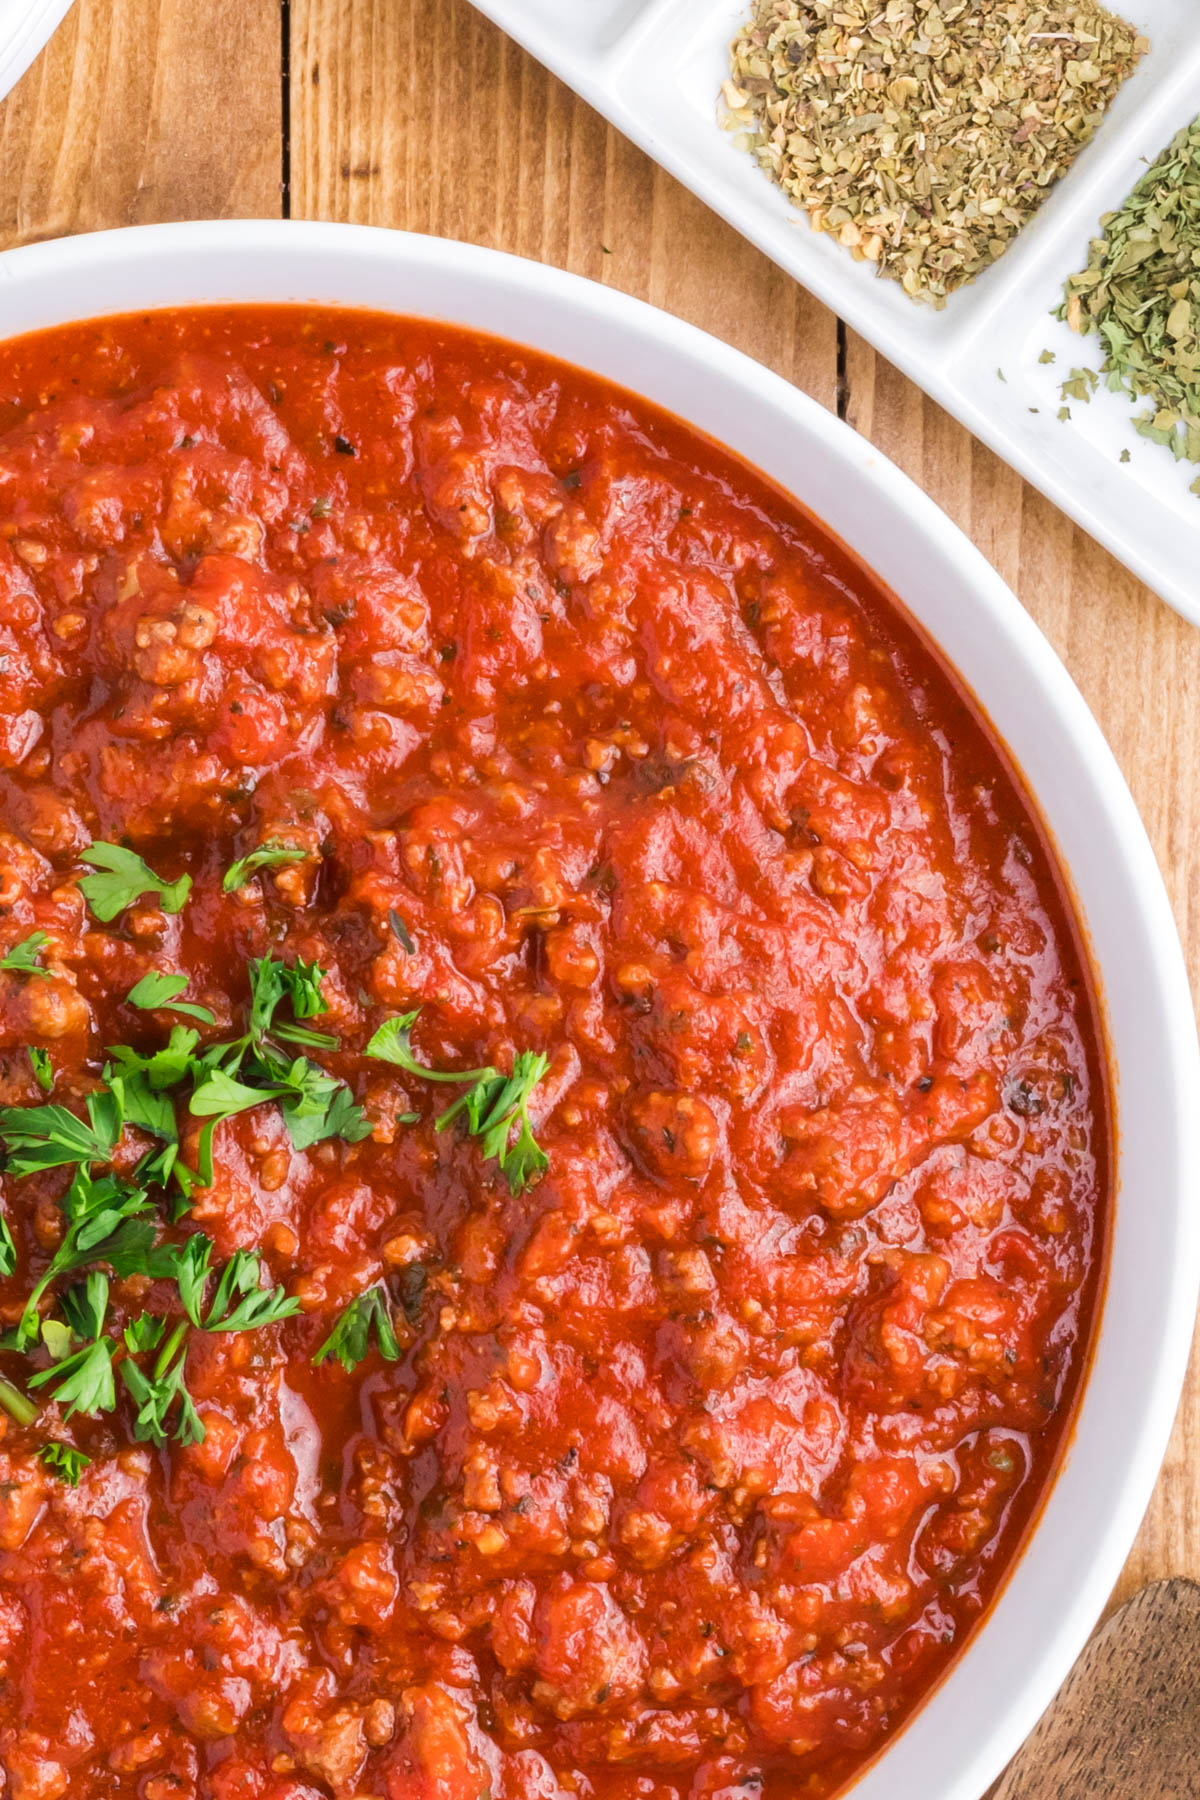 A close up image of meat sauce with chopped parsley sprinkled on top.